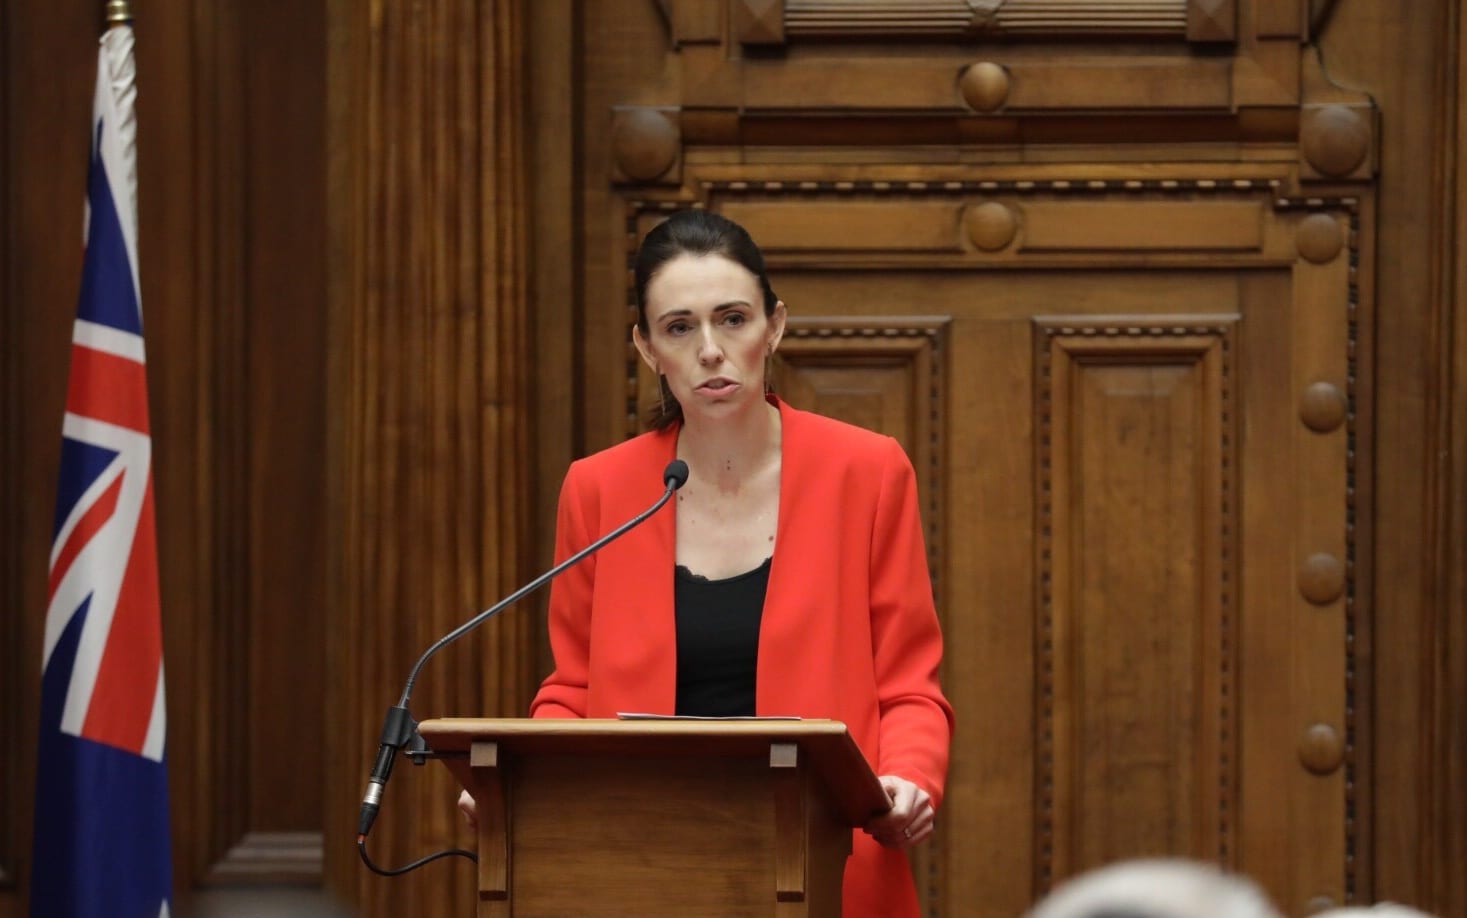 Prime Minister Jacinda Ardern announced that NZ history will be compulsory in all schools by 2022.